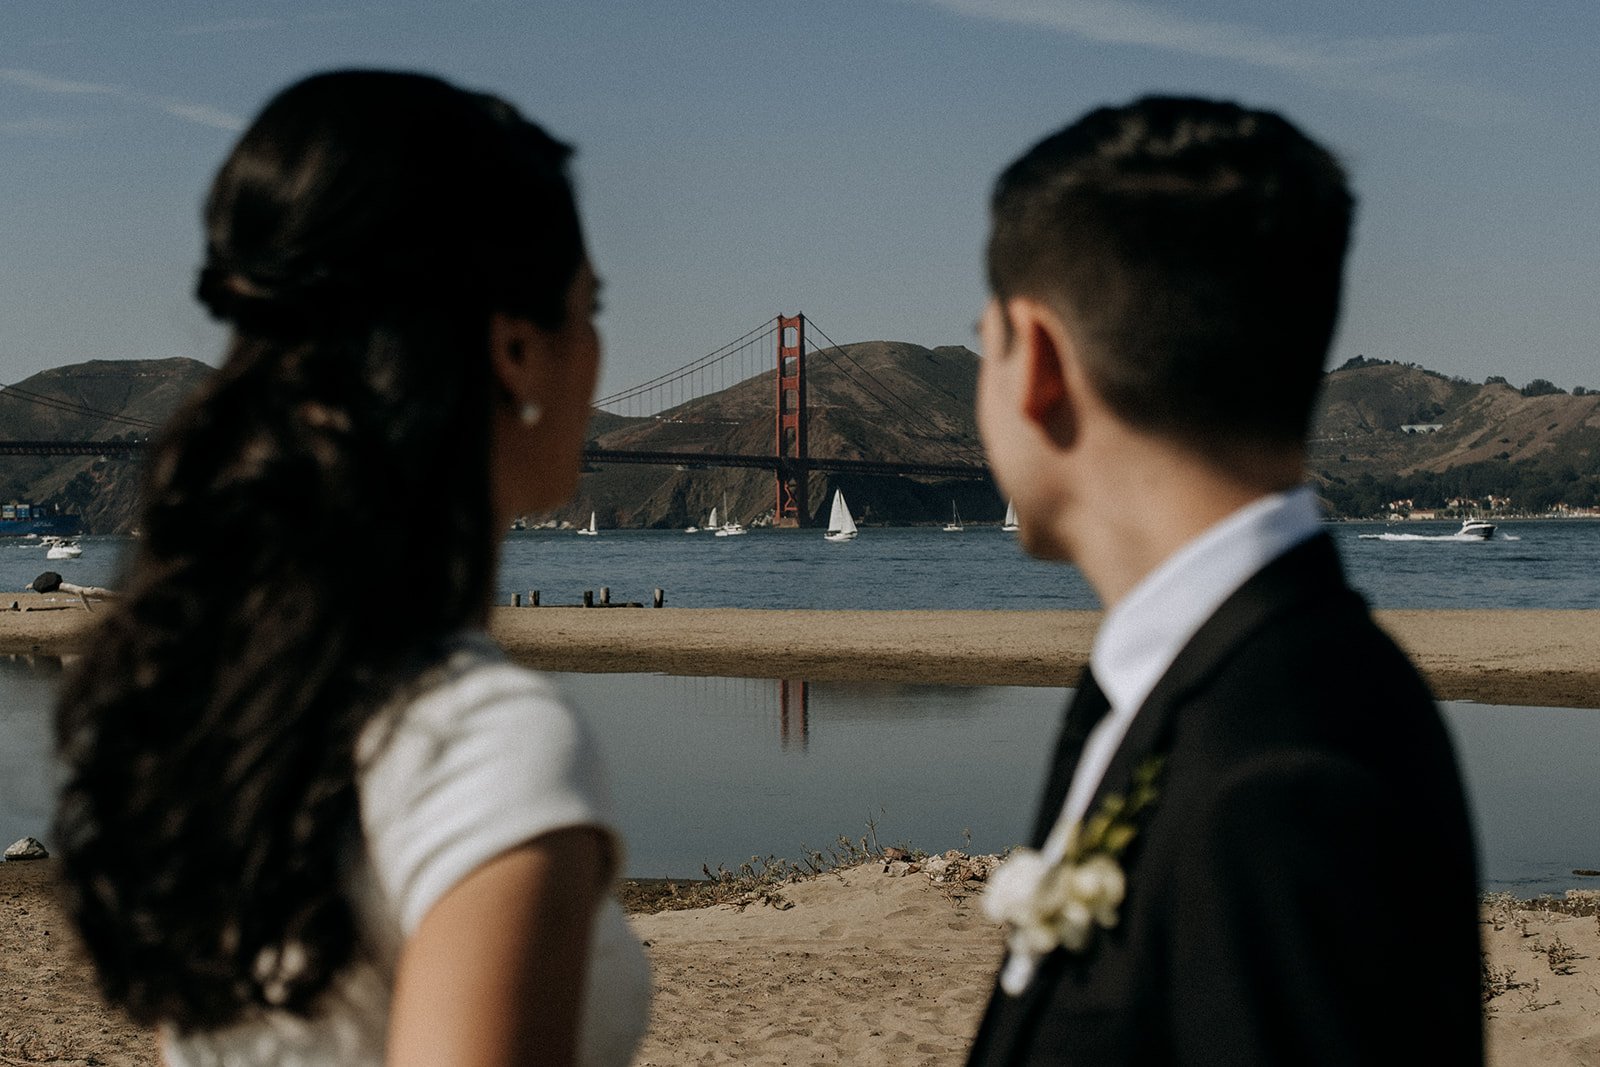  bride and groom on beach looking across to the golden gate bridge  